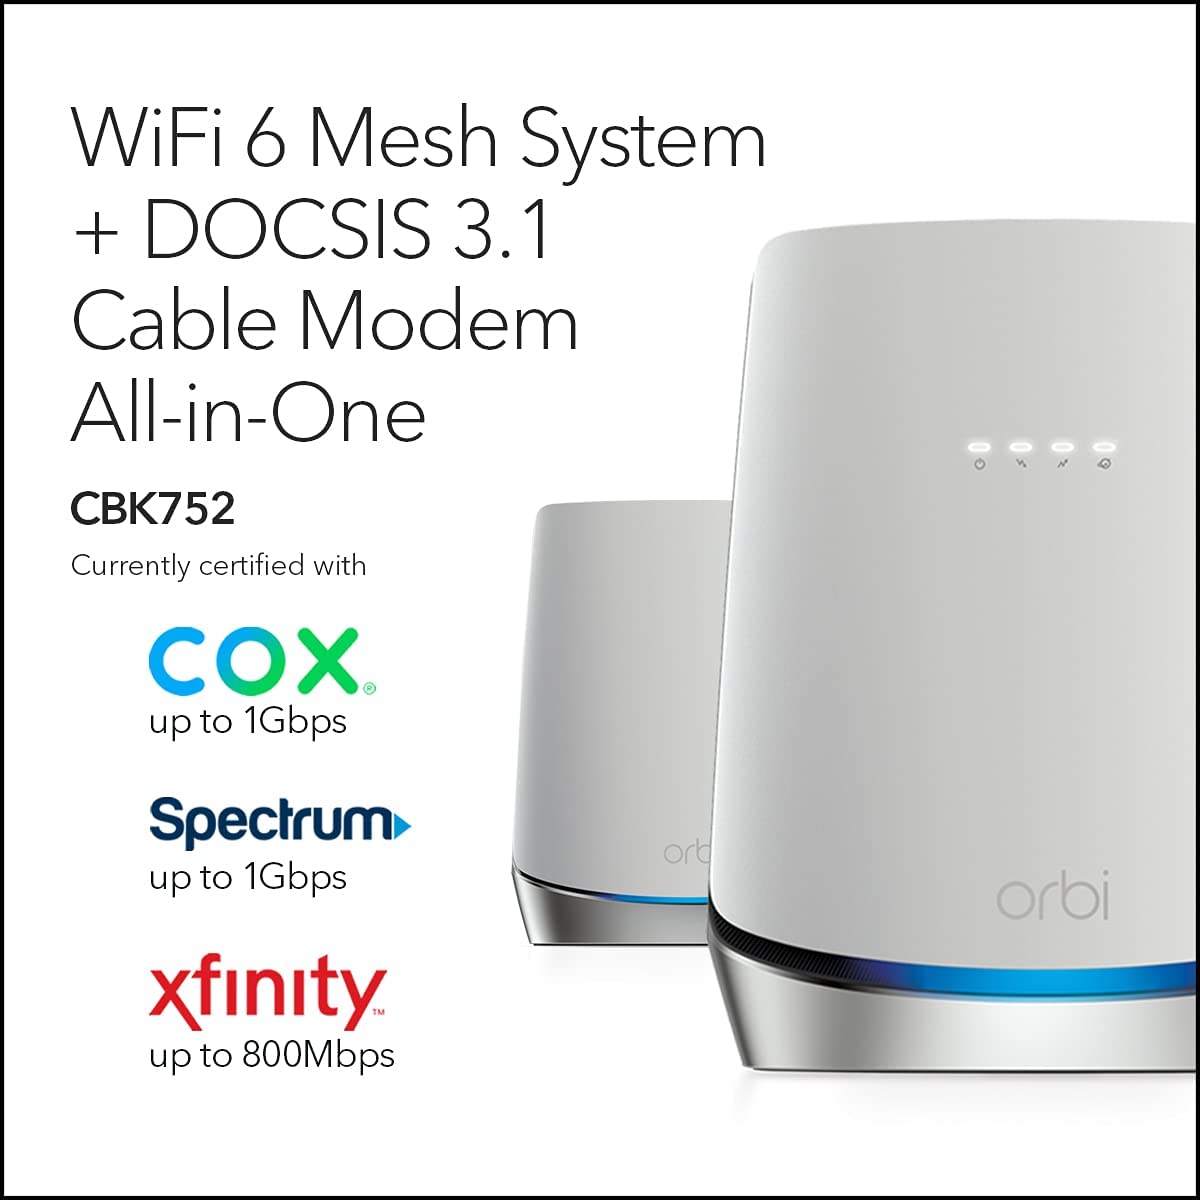 NETGEAR - Orbi AX4200 Tri-Band Mesh WiFi 6 System with DOCSIS 3.1 Cable Modem Router + 1 Satellite Extender, 4.2Gbps (CBK752) - image 3 of 6